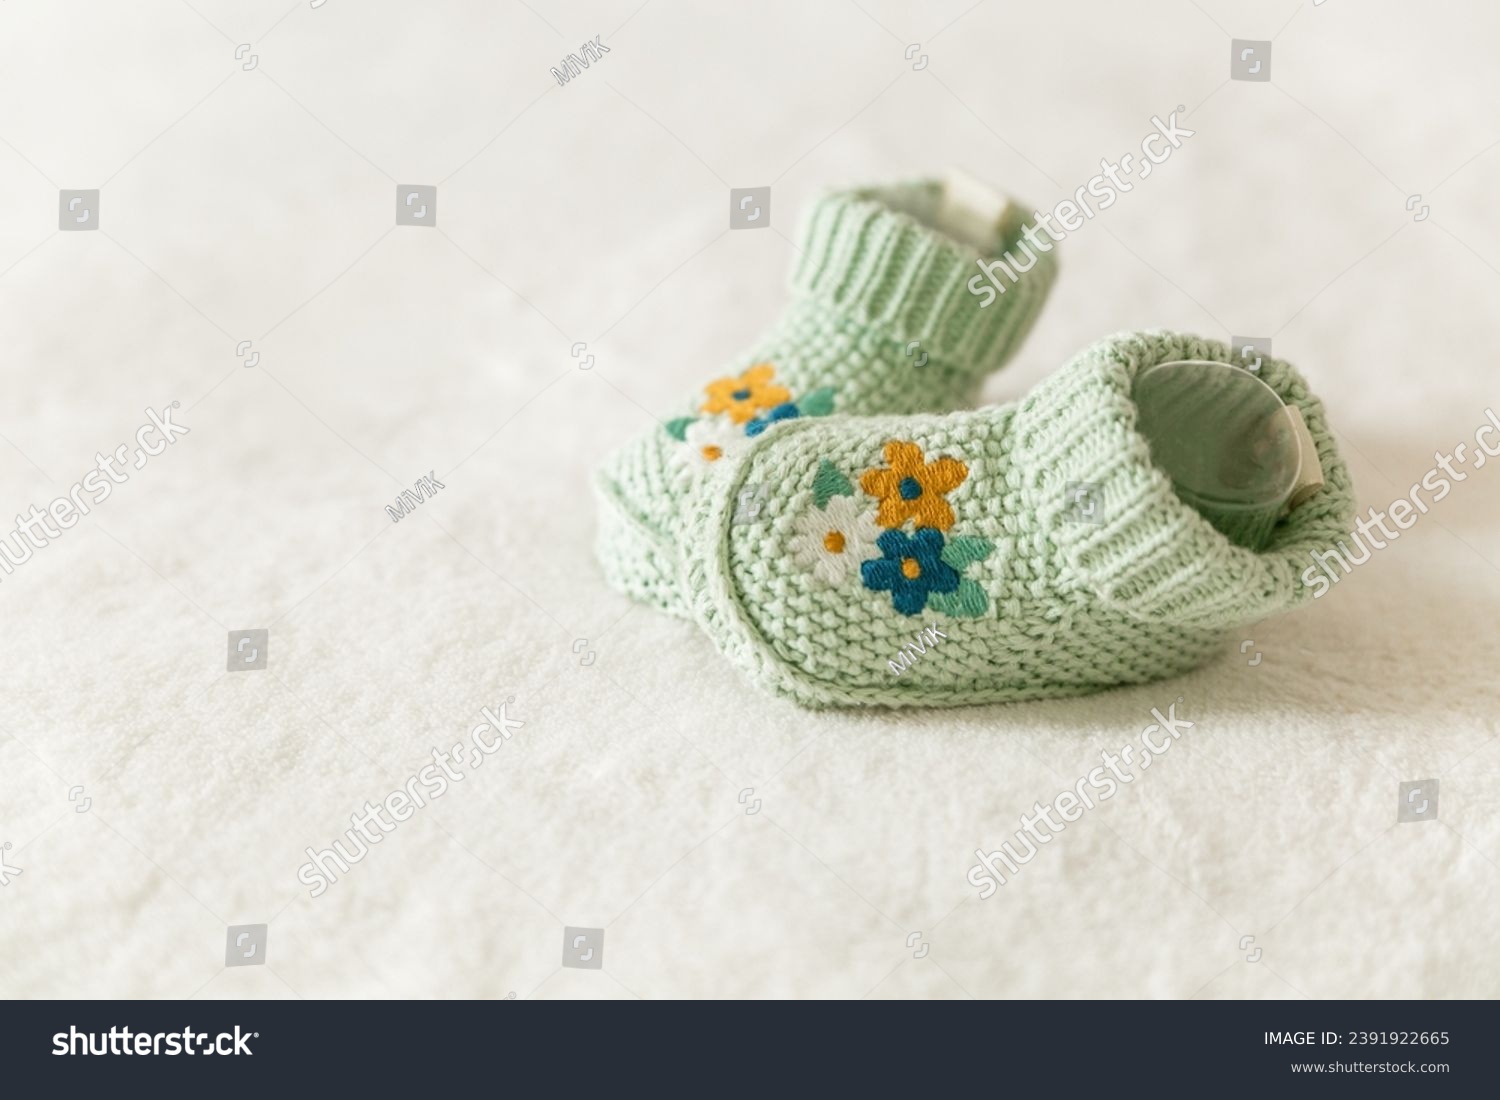 Beautiful knitted baby socks with embroidery, handmade knitted booties on a white background with copy space. Pregnancy and motherhood concept, first birthday, handmade socks, baby warm clothes #2391922665